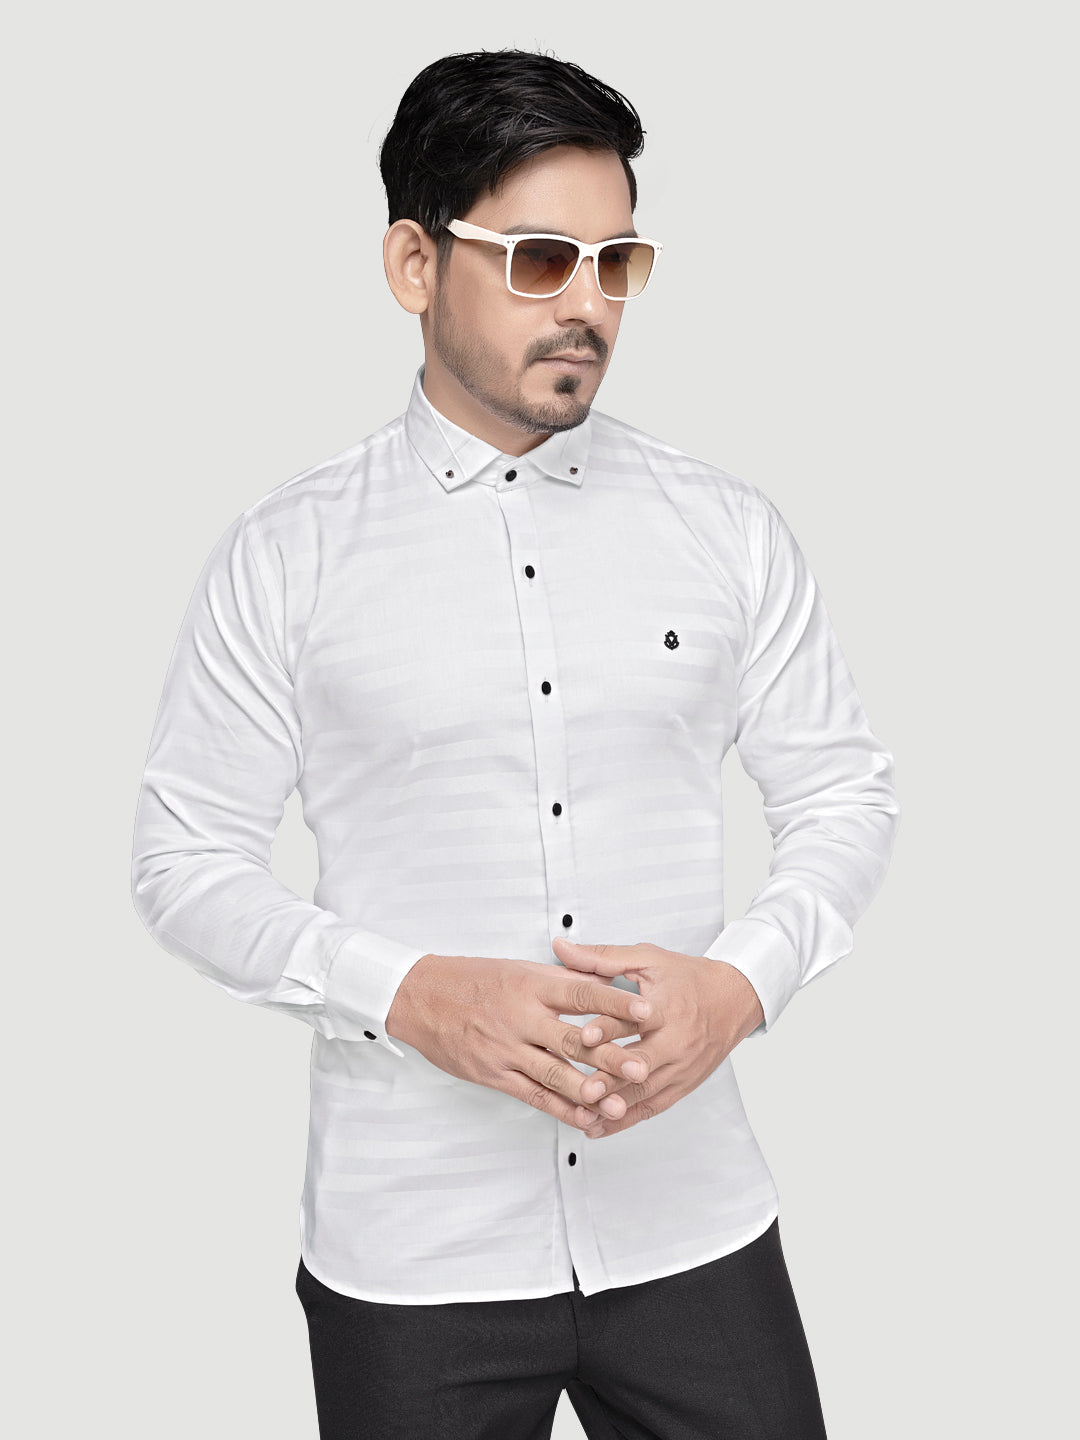 Black and White Shirts Men's Designer Weft Shirt with Collar Accessory-1